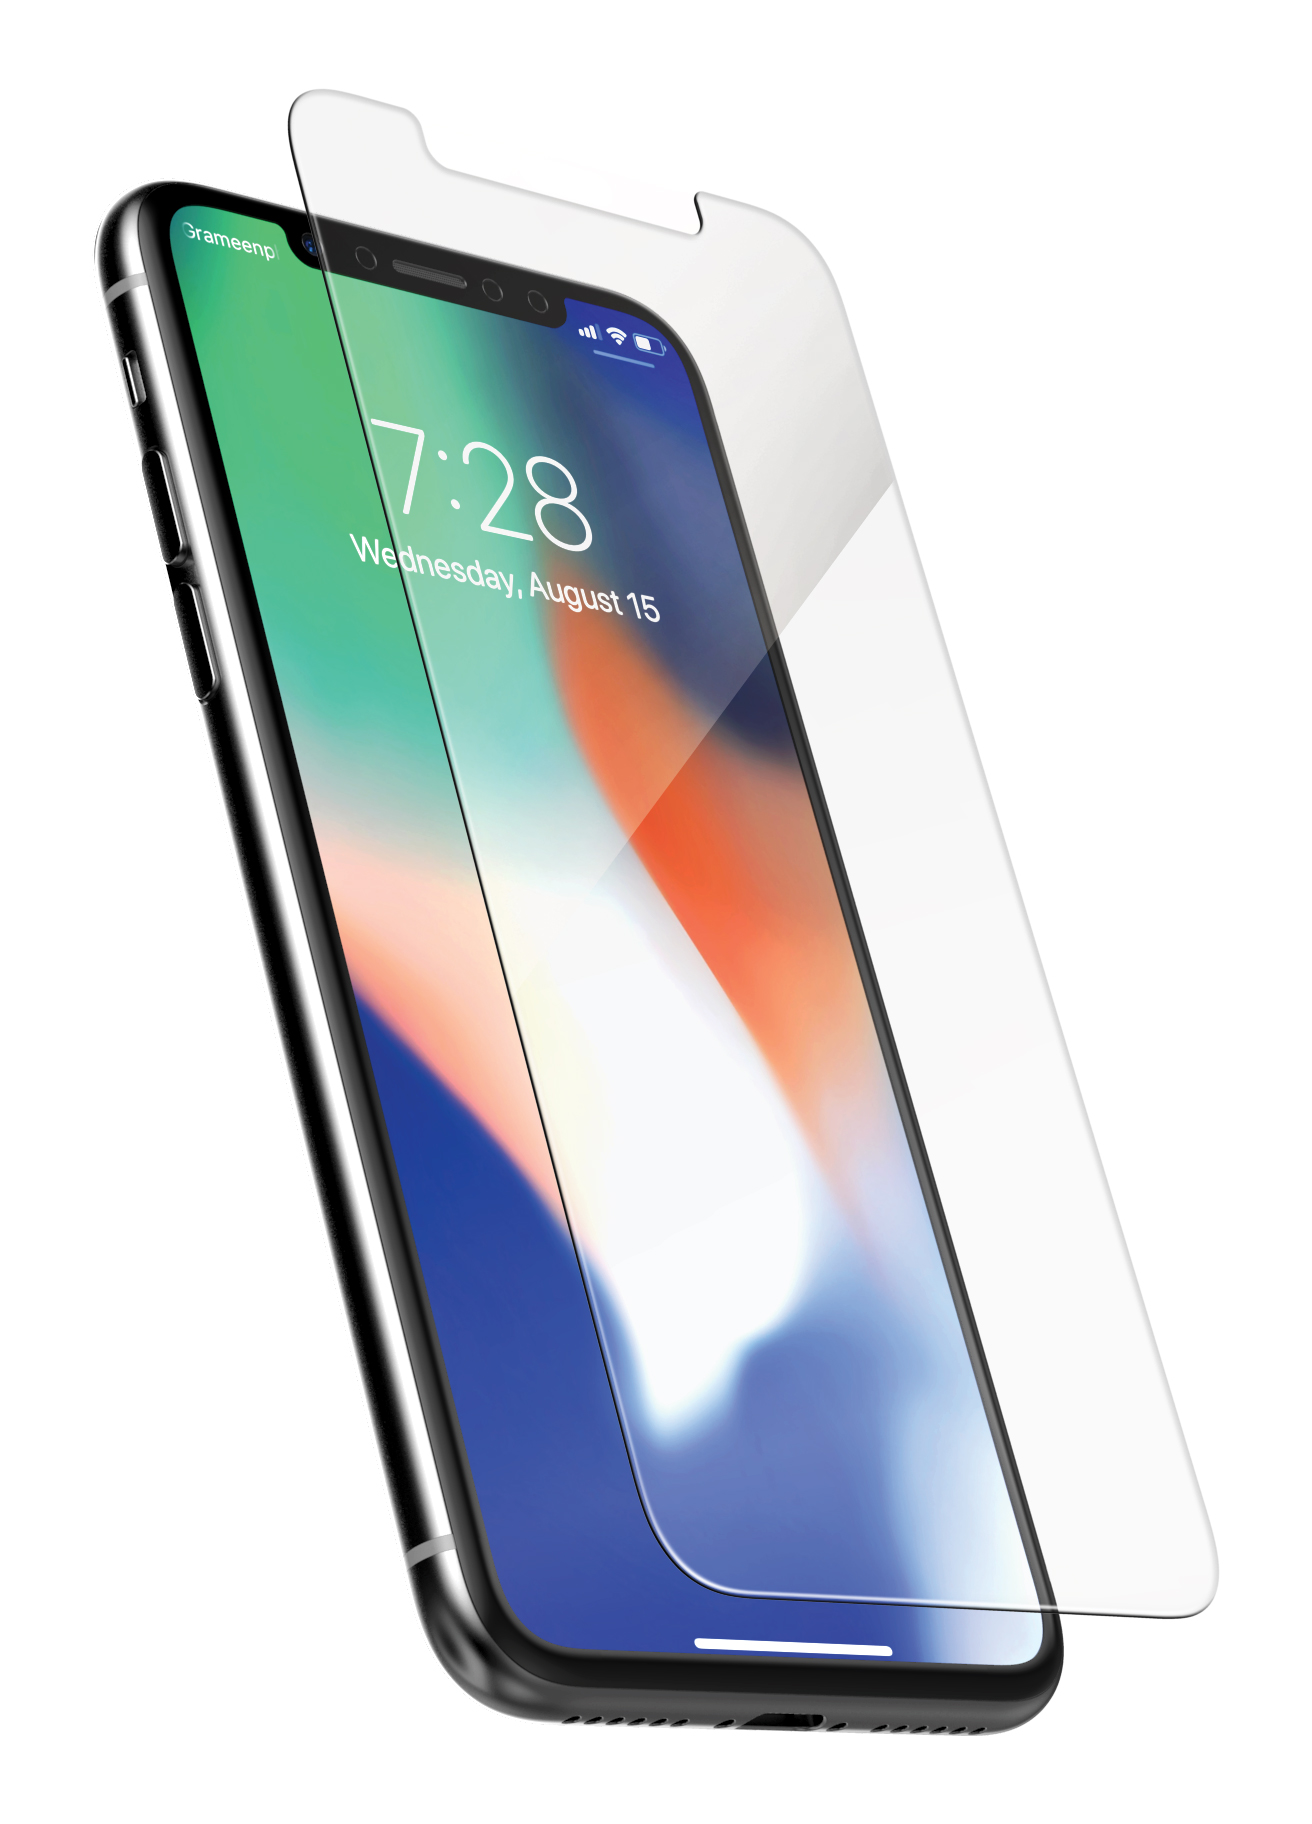 Base Premium Tempered Glass Screen Protector for iPhone X Max / 11 Pro Max